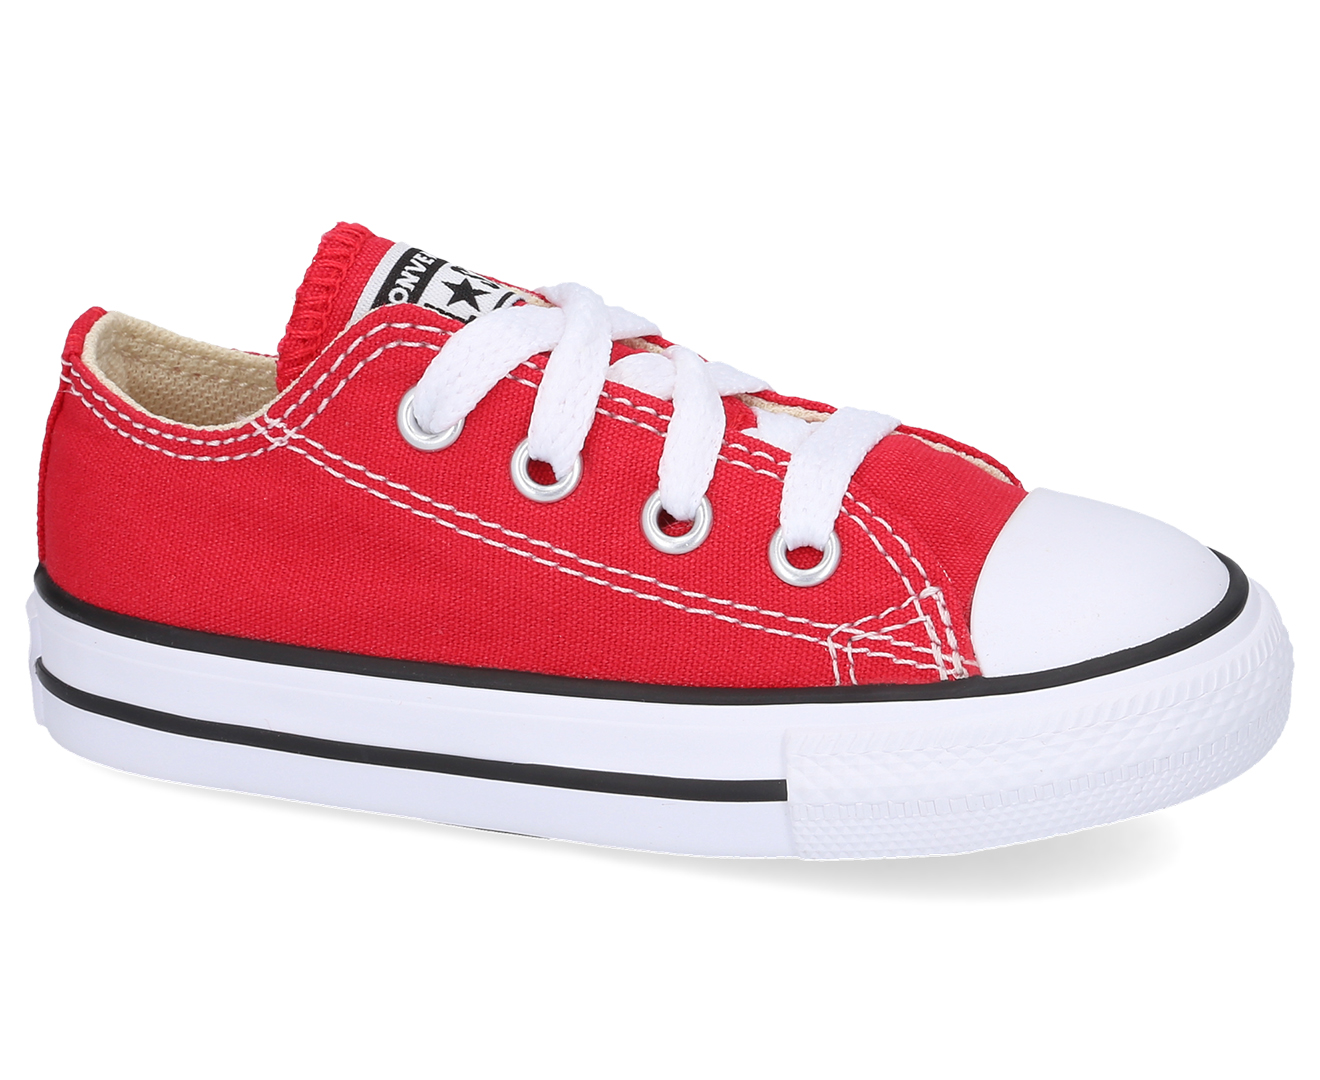 Converse Toddler Chuck Taylor All Star Low Top Sneakers - Red | Catch.co.nz